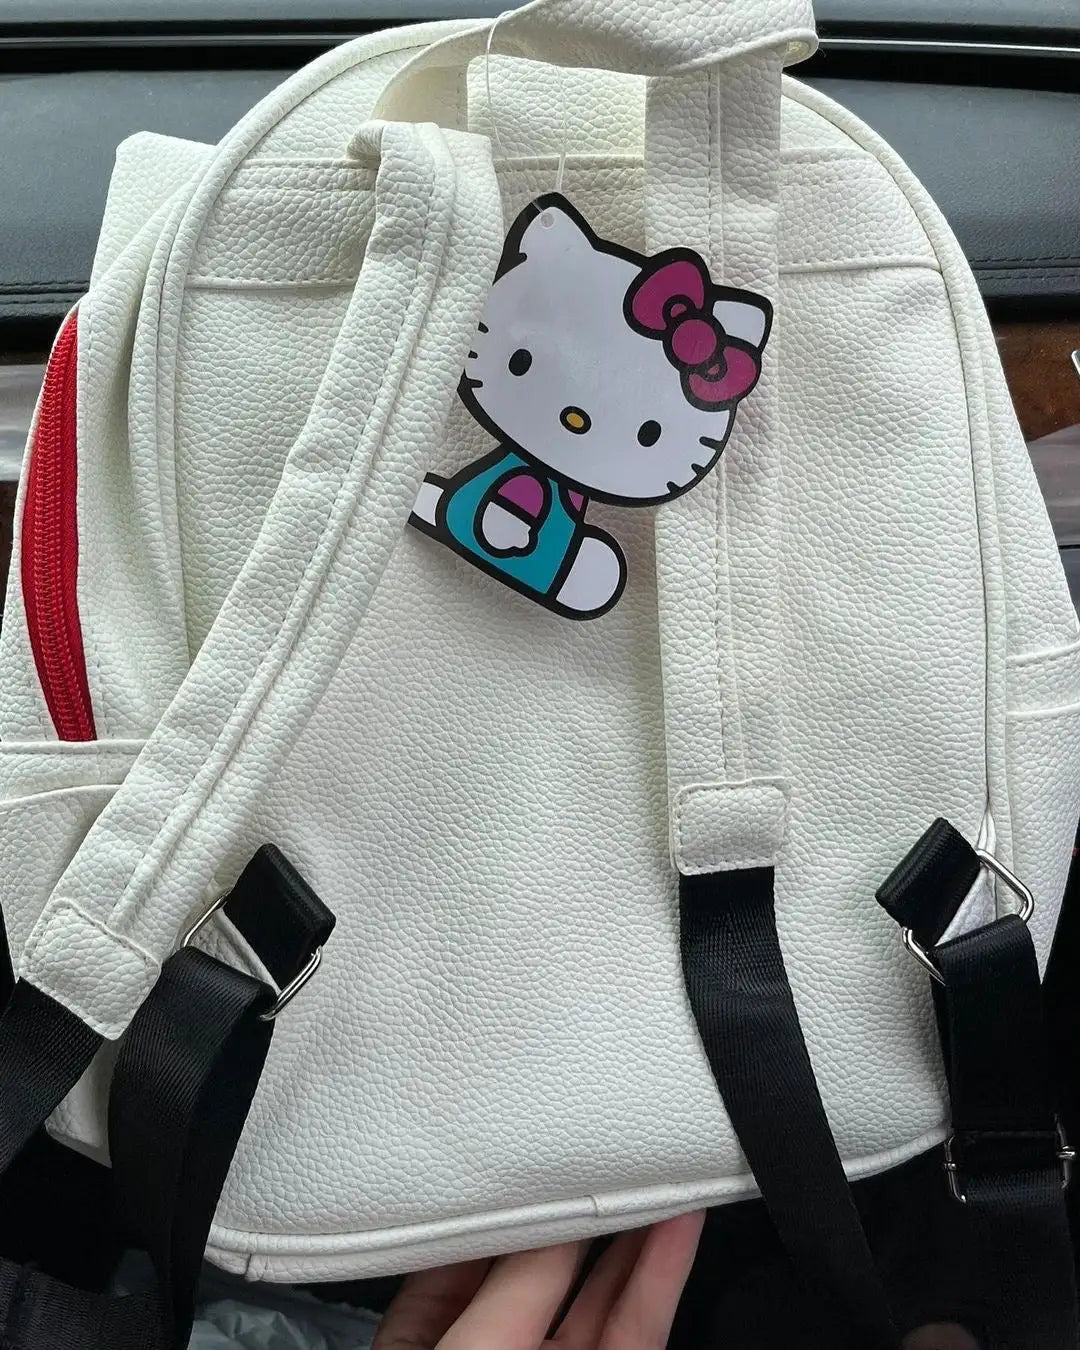 Red White Bow Backpack Bag